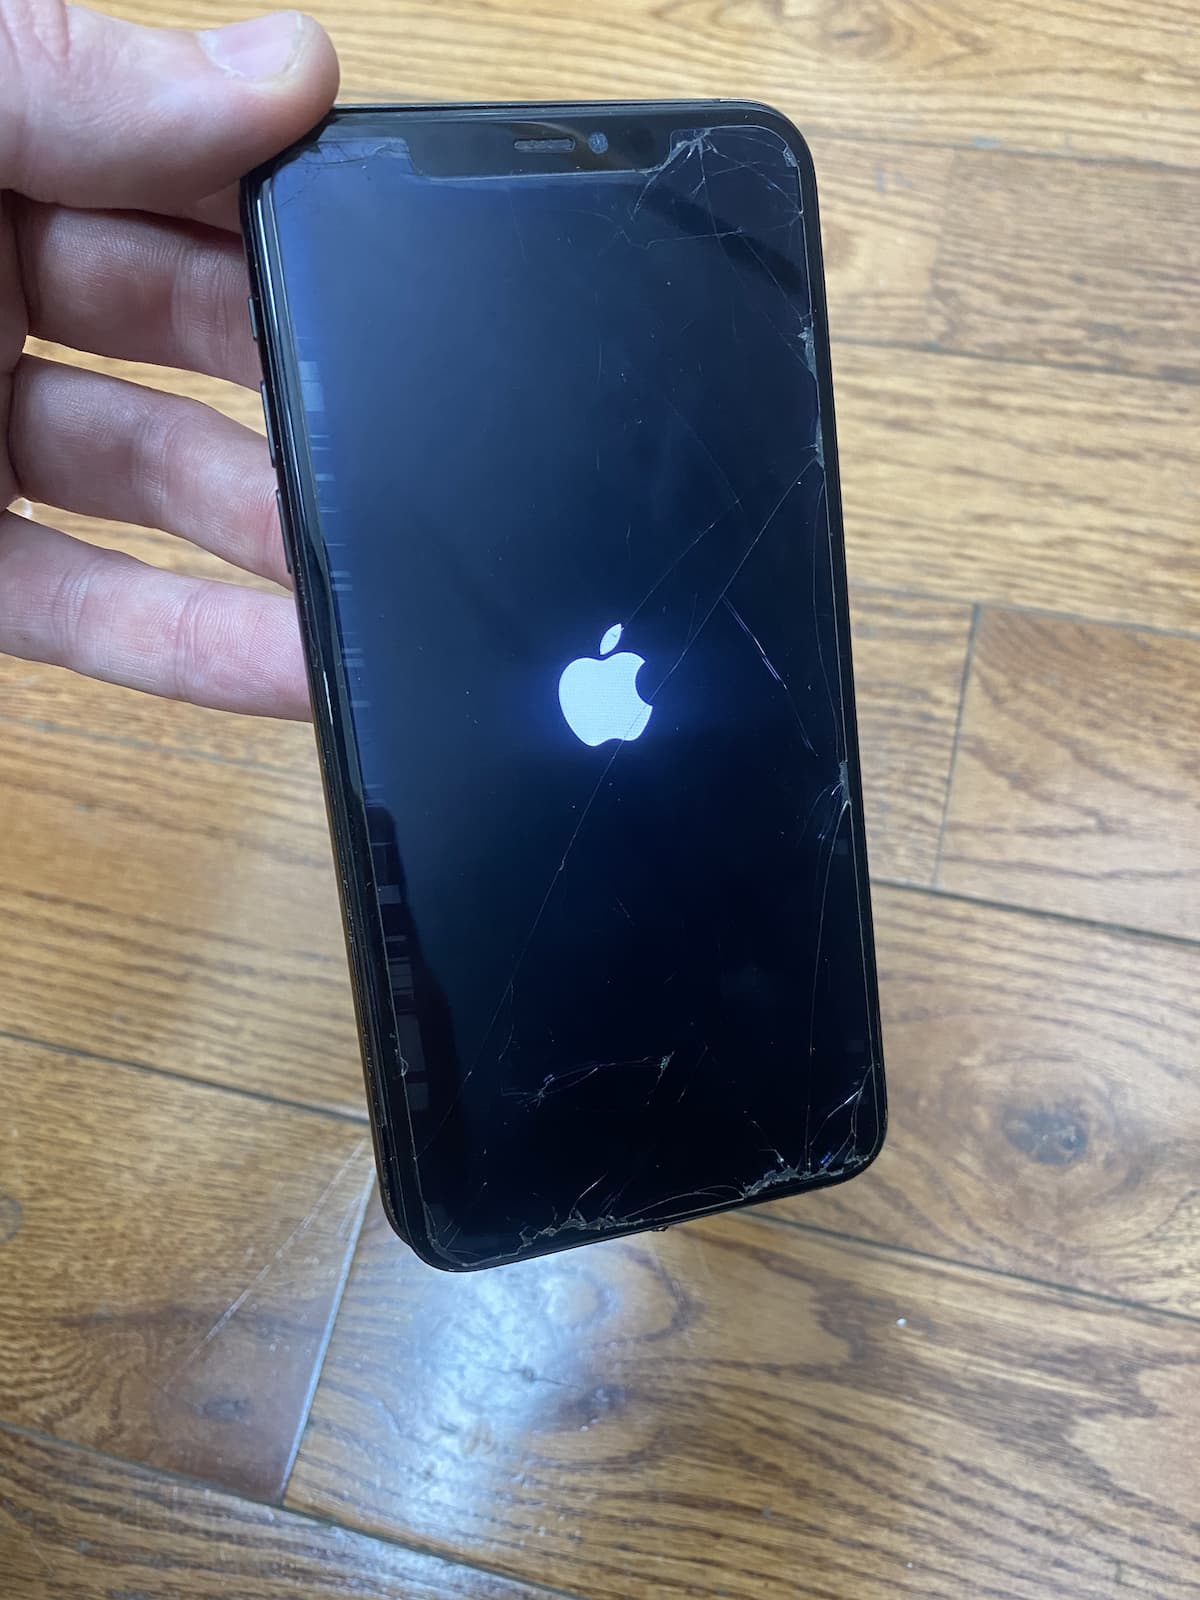 iPhone With Apple Logo Boot Loop